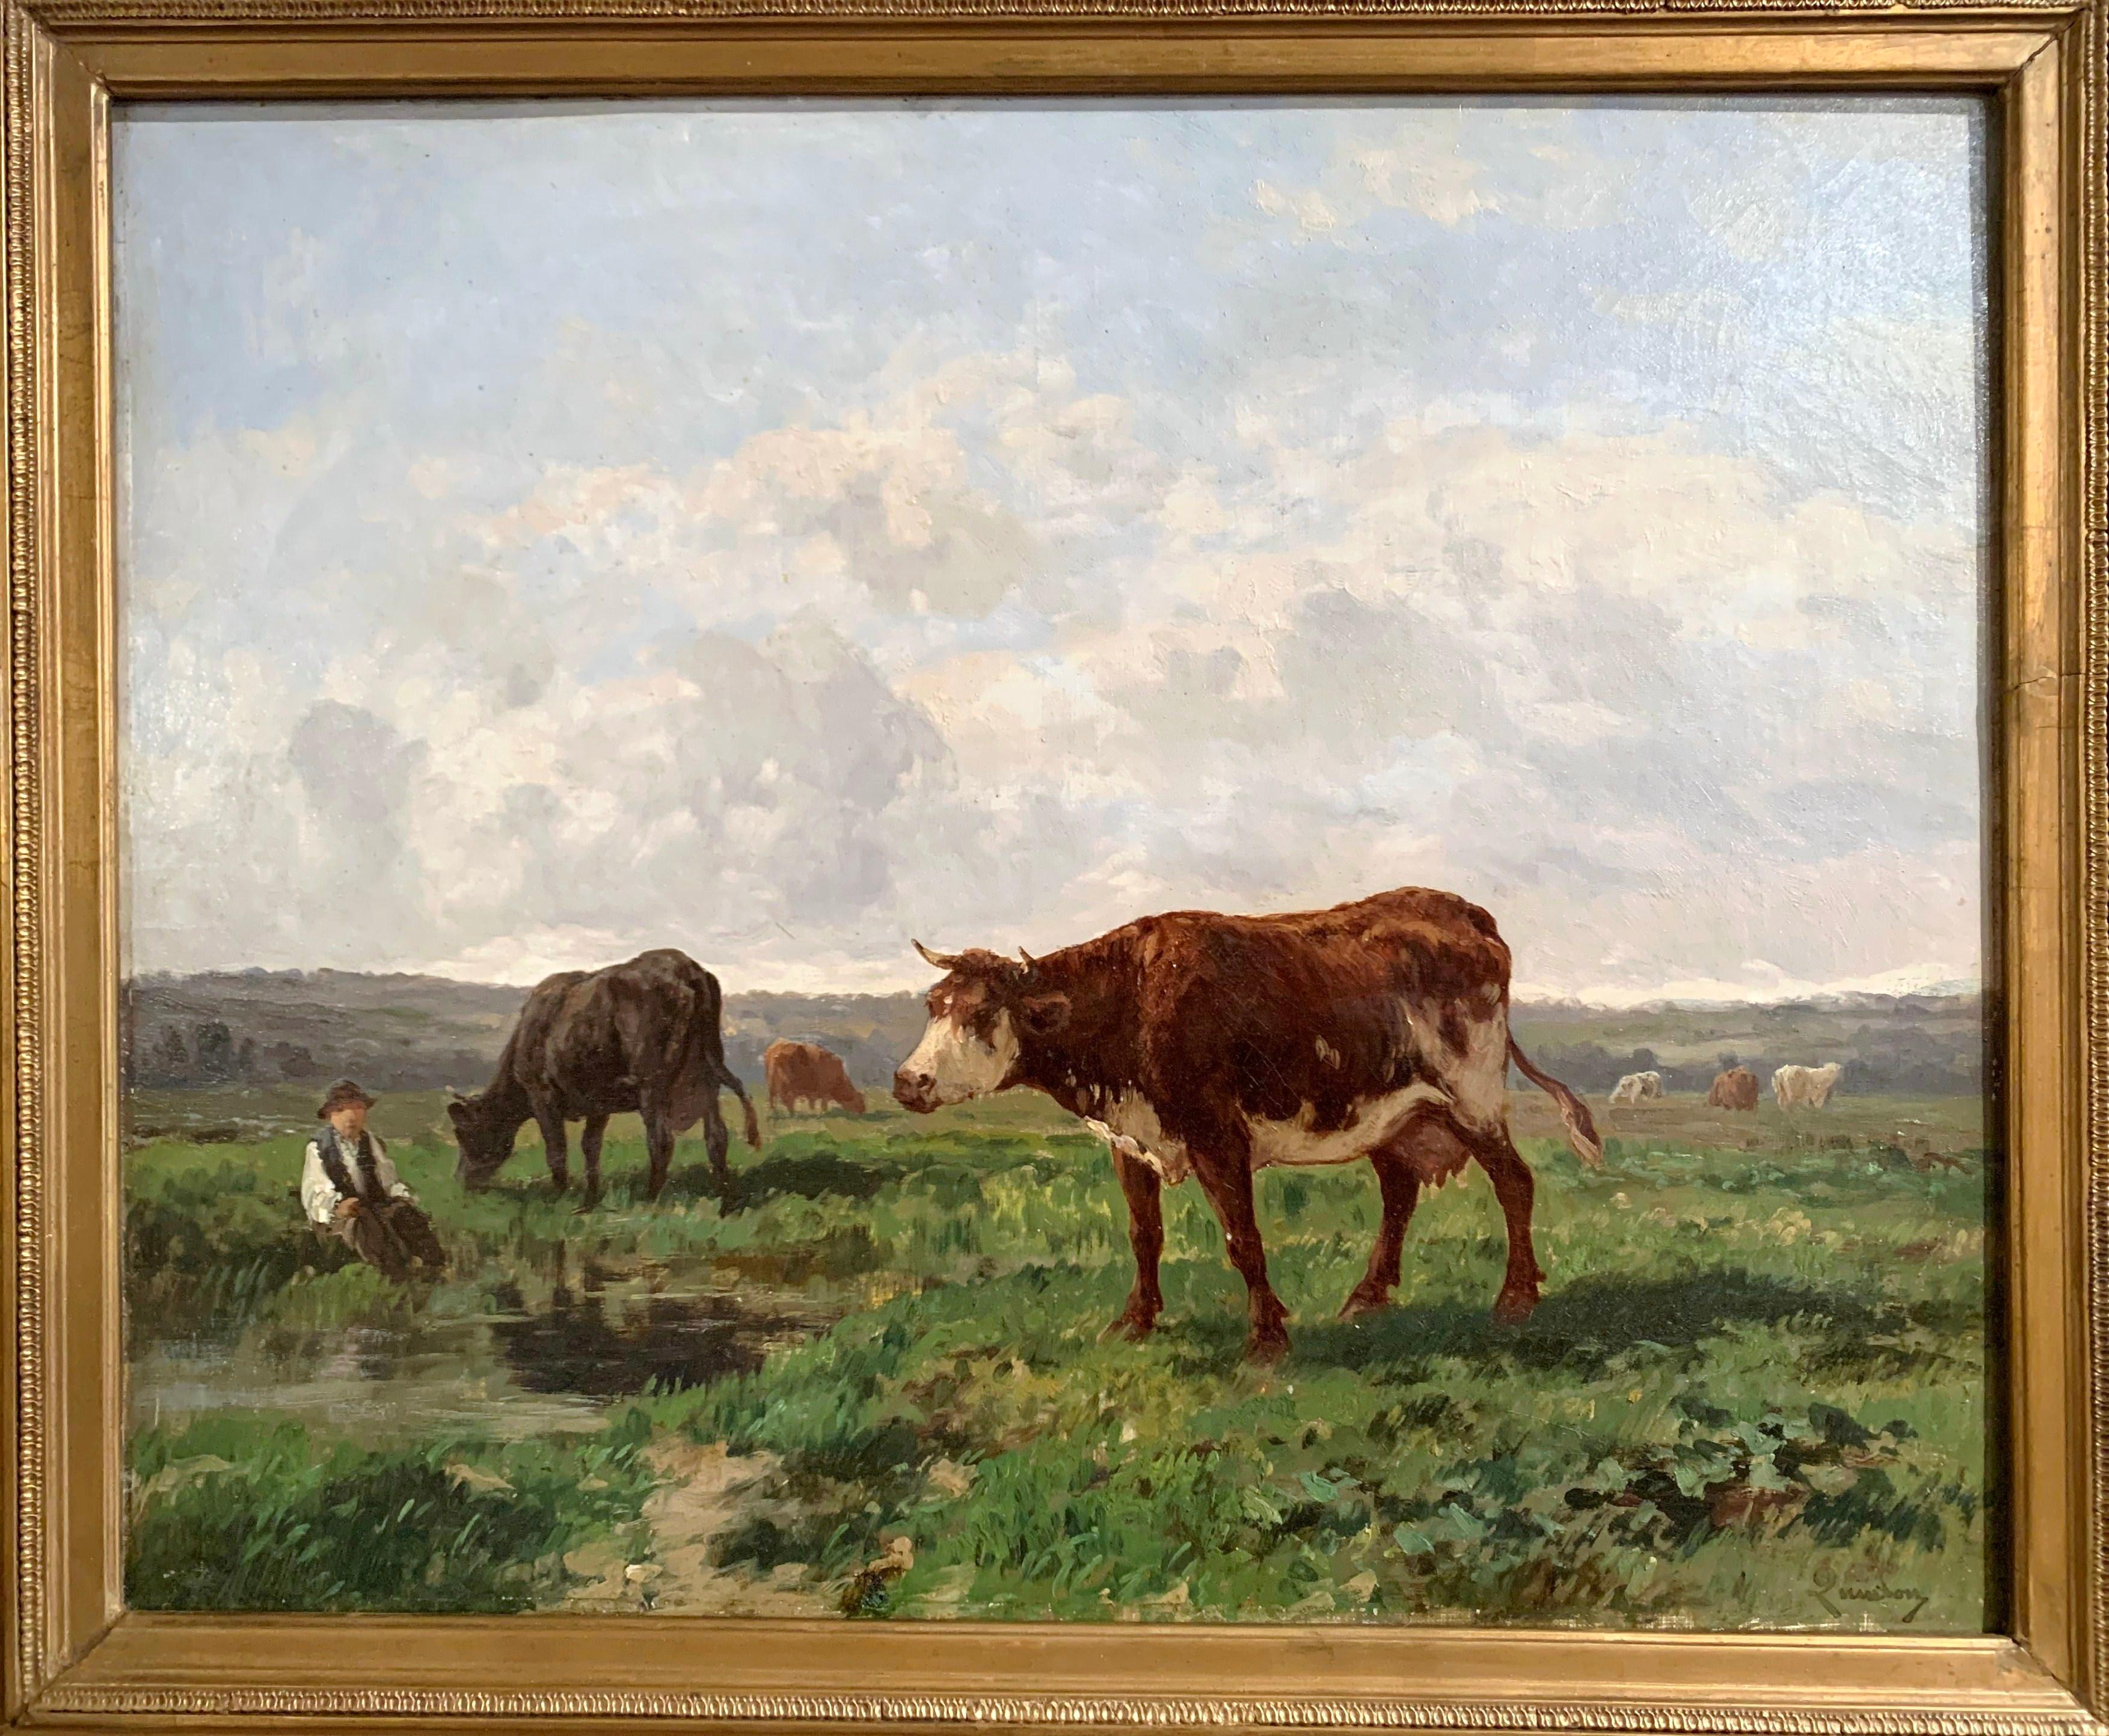 Set in the original carved giltwood frame, this oil on canvas painting was created in France, circa 1880, the peaceful painting depicts a pastoral scene with cows drinking in a pasture while a seated farmer is watching. The artwork is signed on the